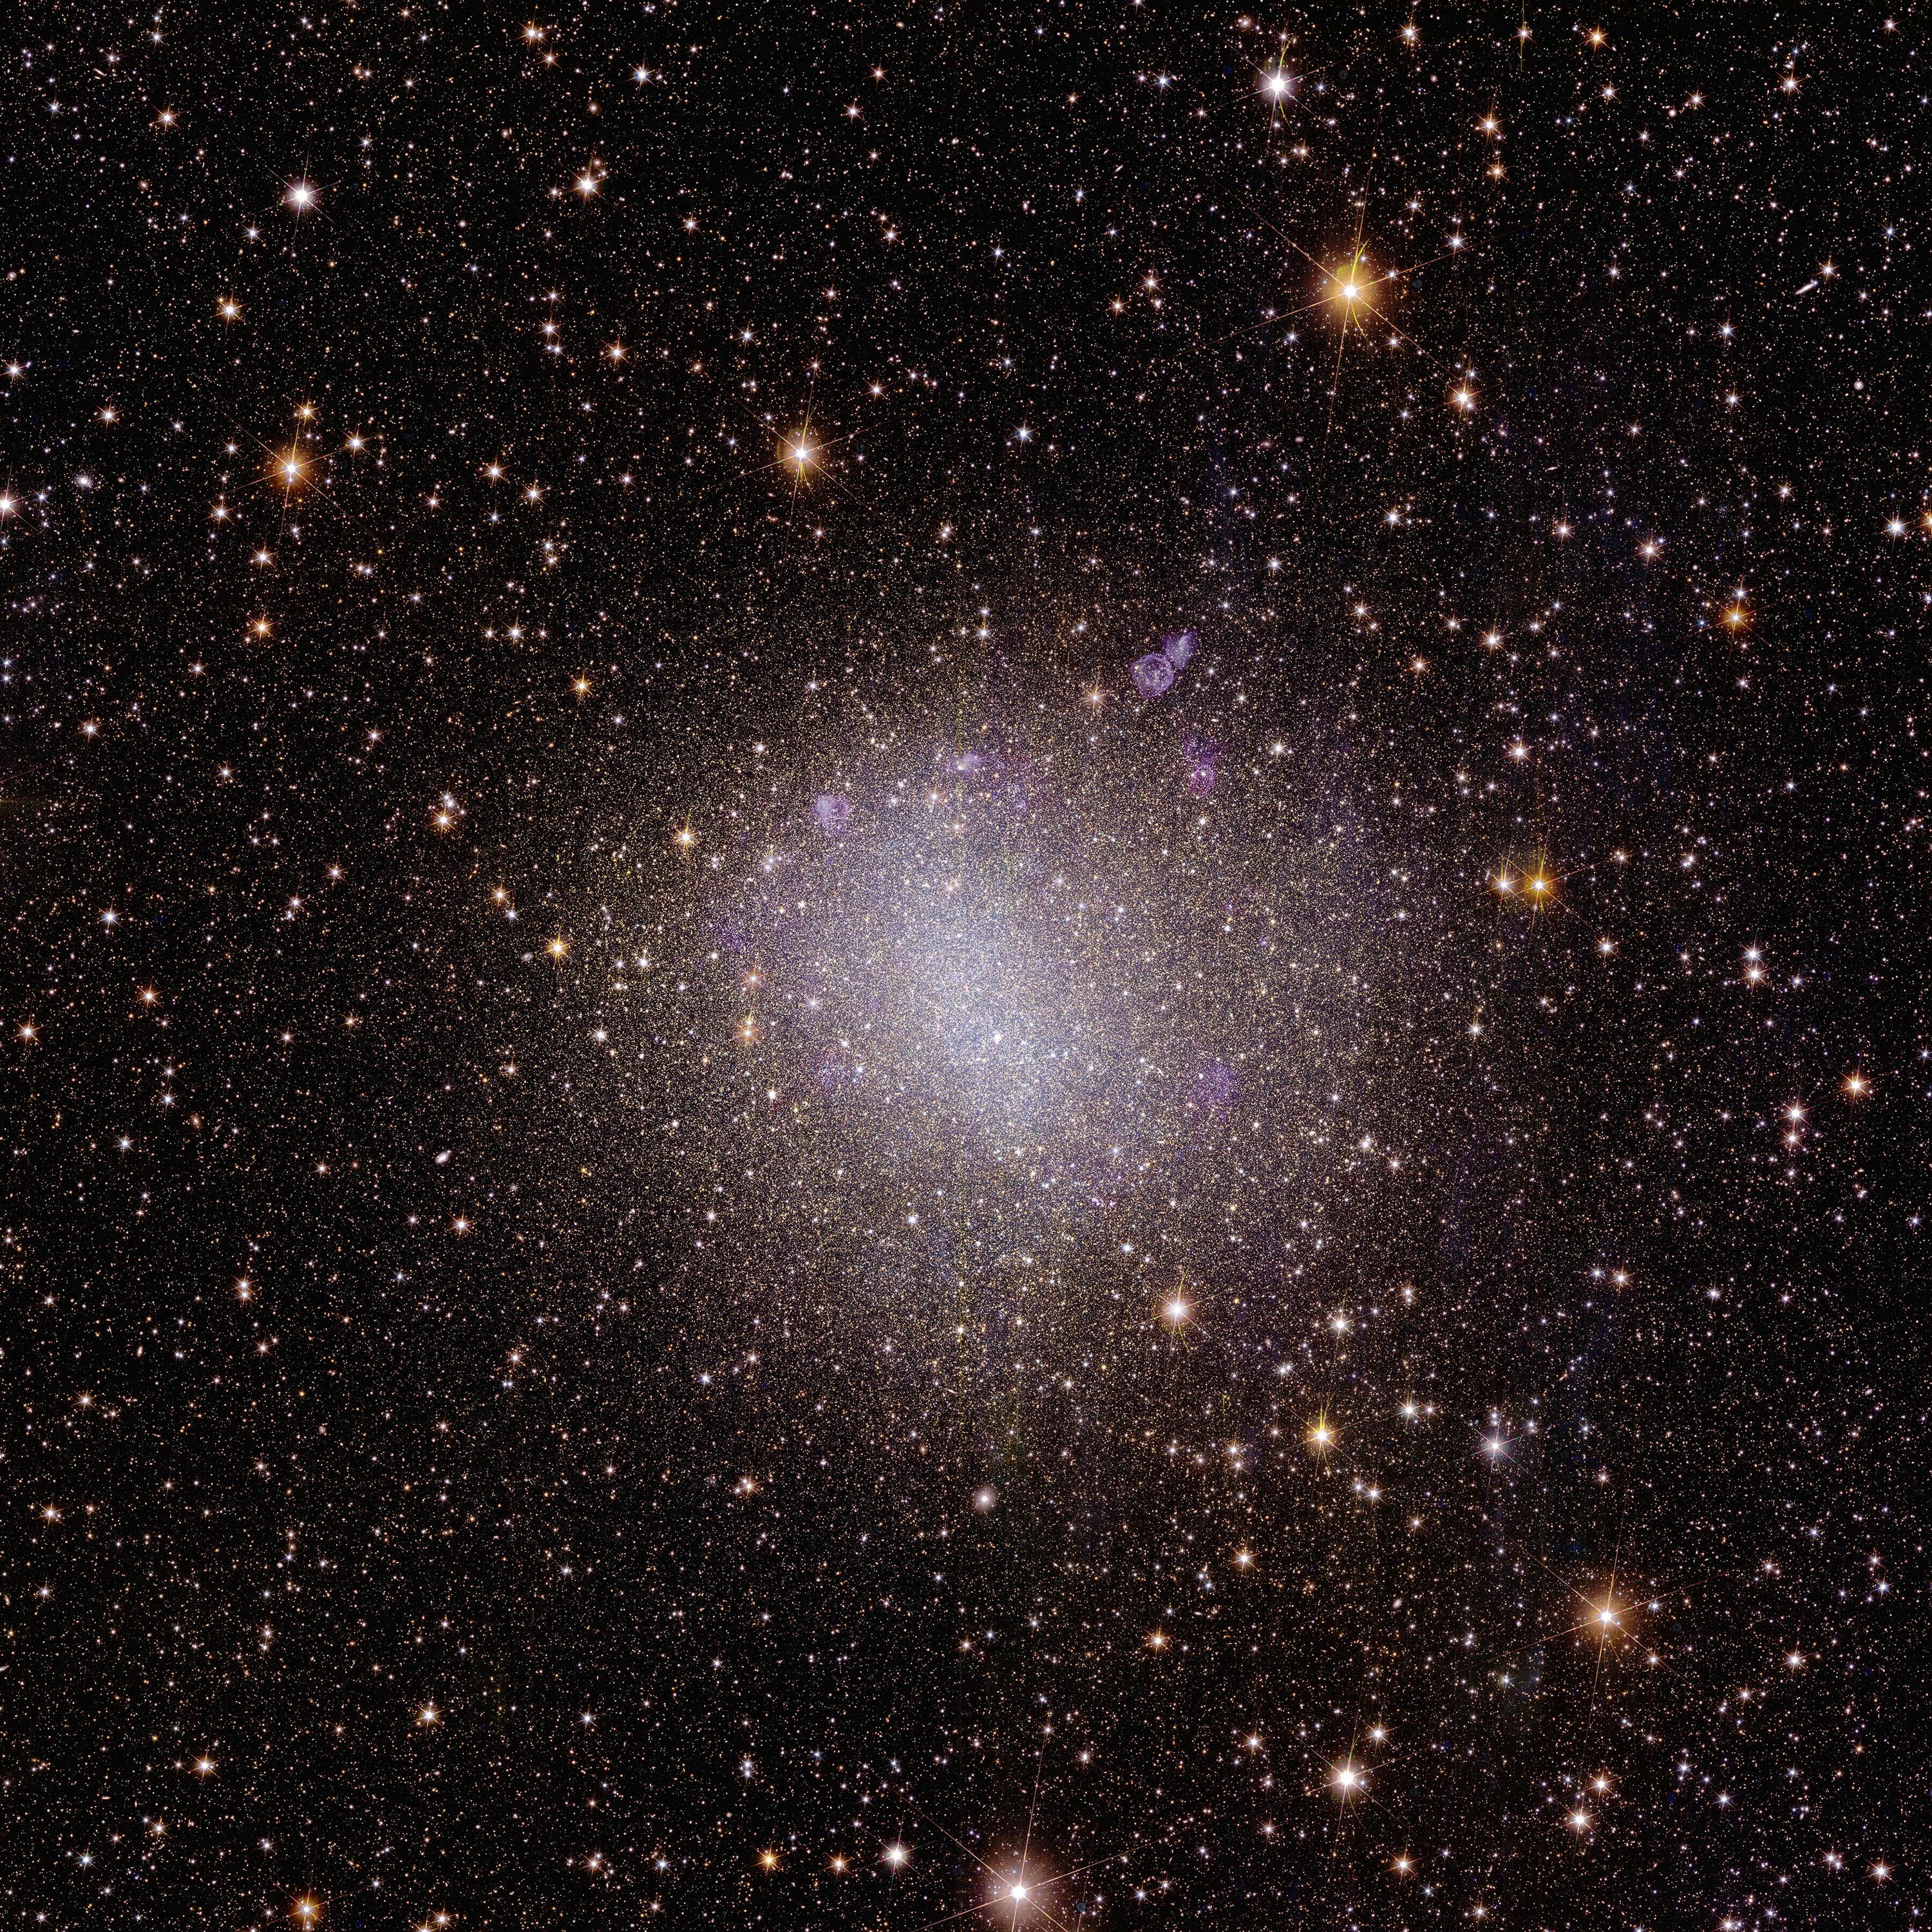 Euclid’s view of the irregular dwarf galaxy called NGC 6822 